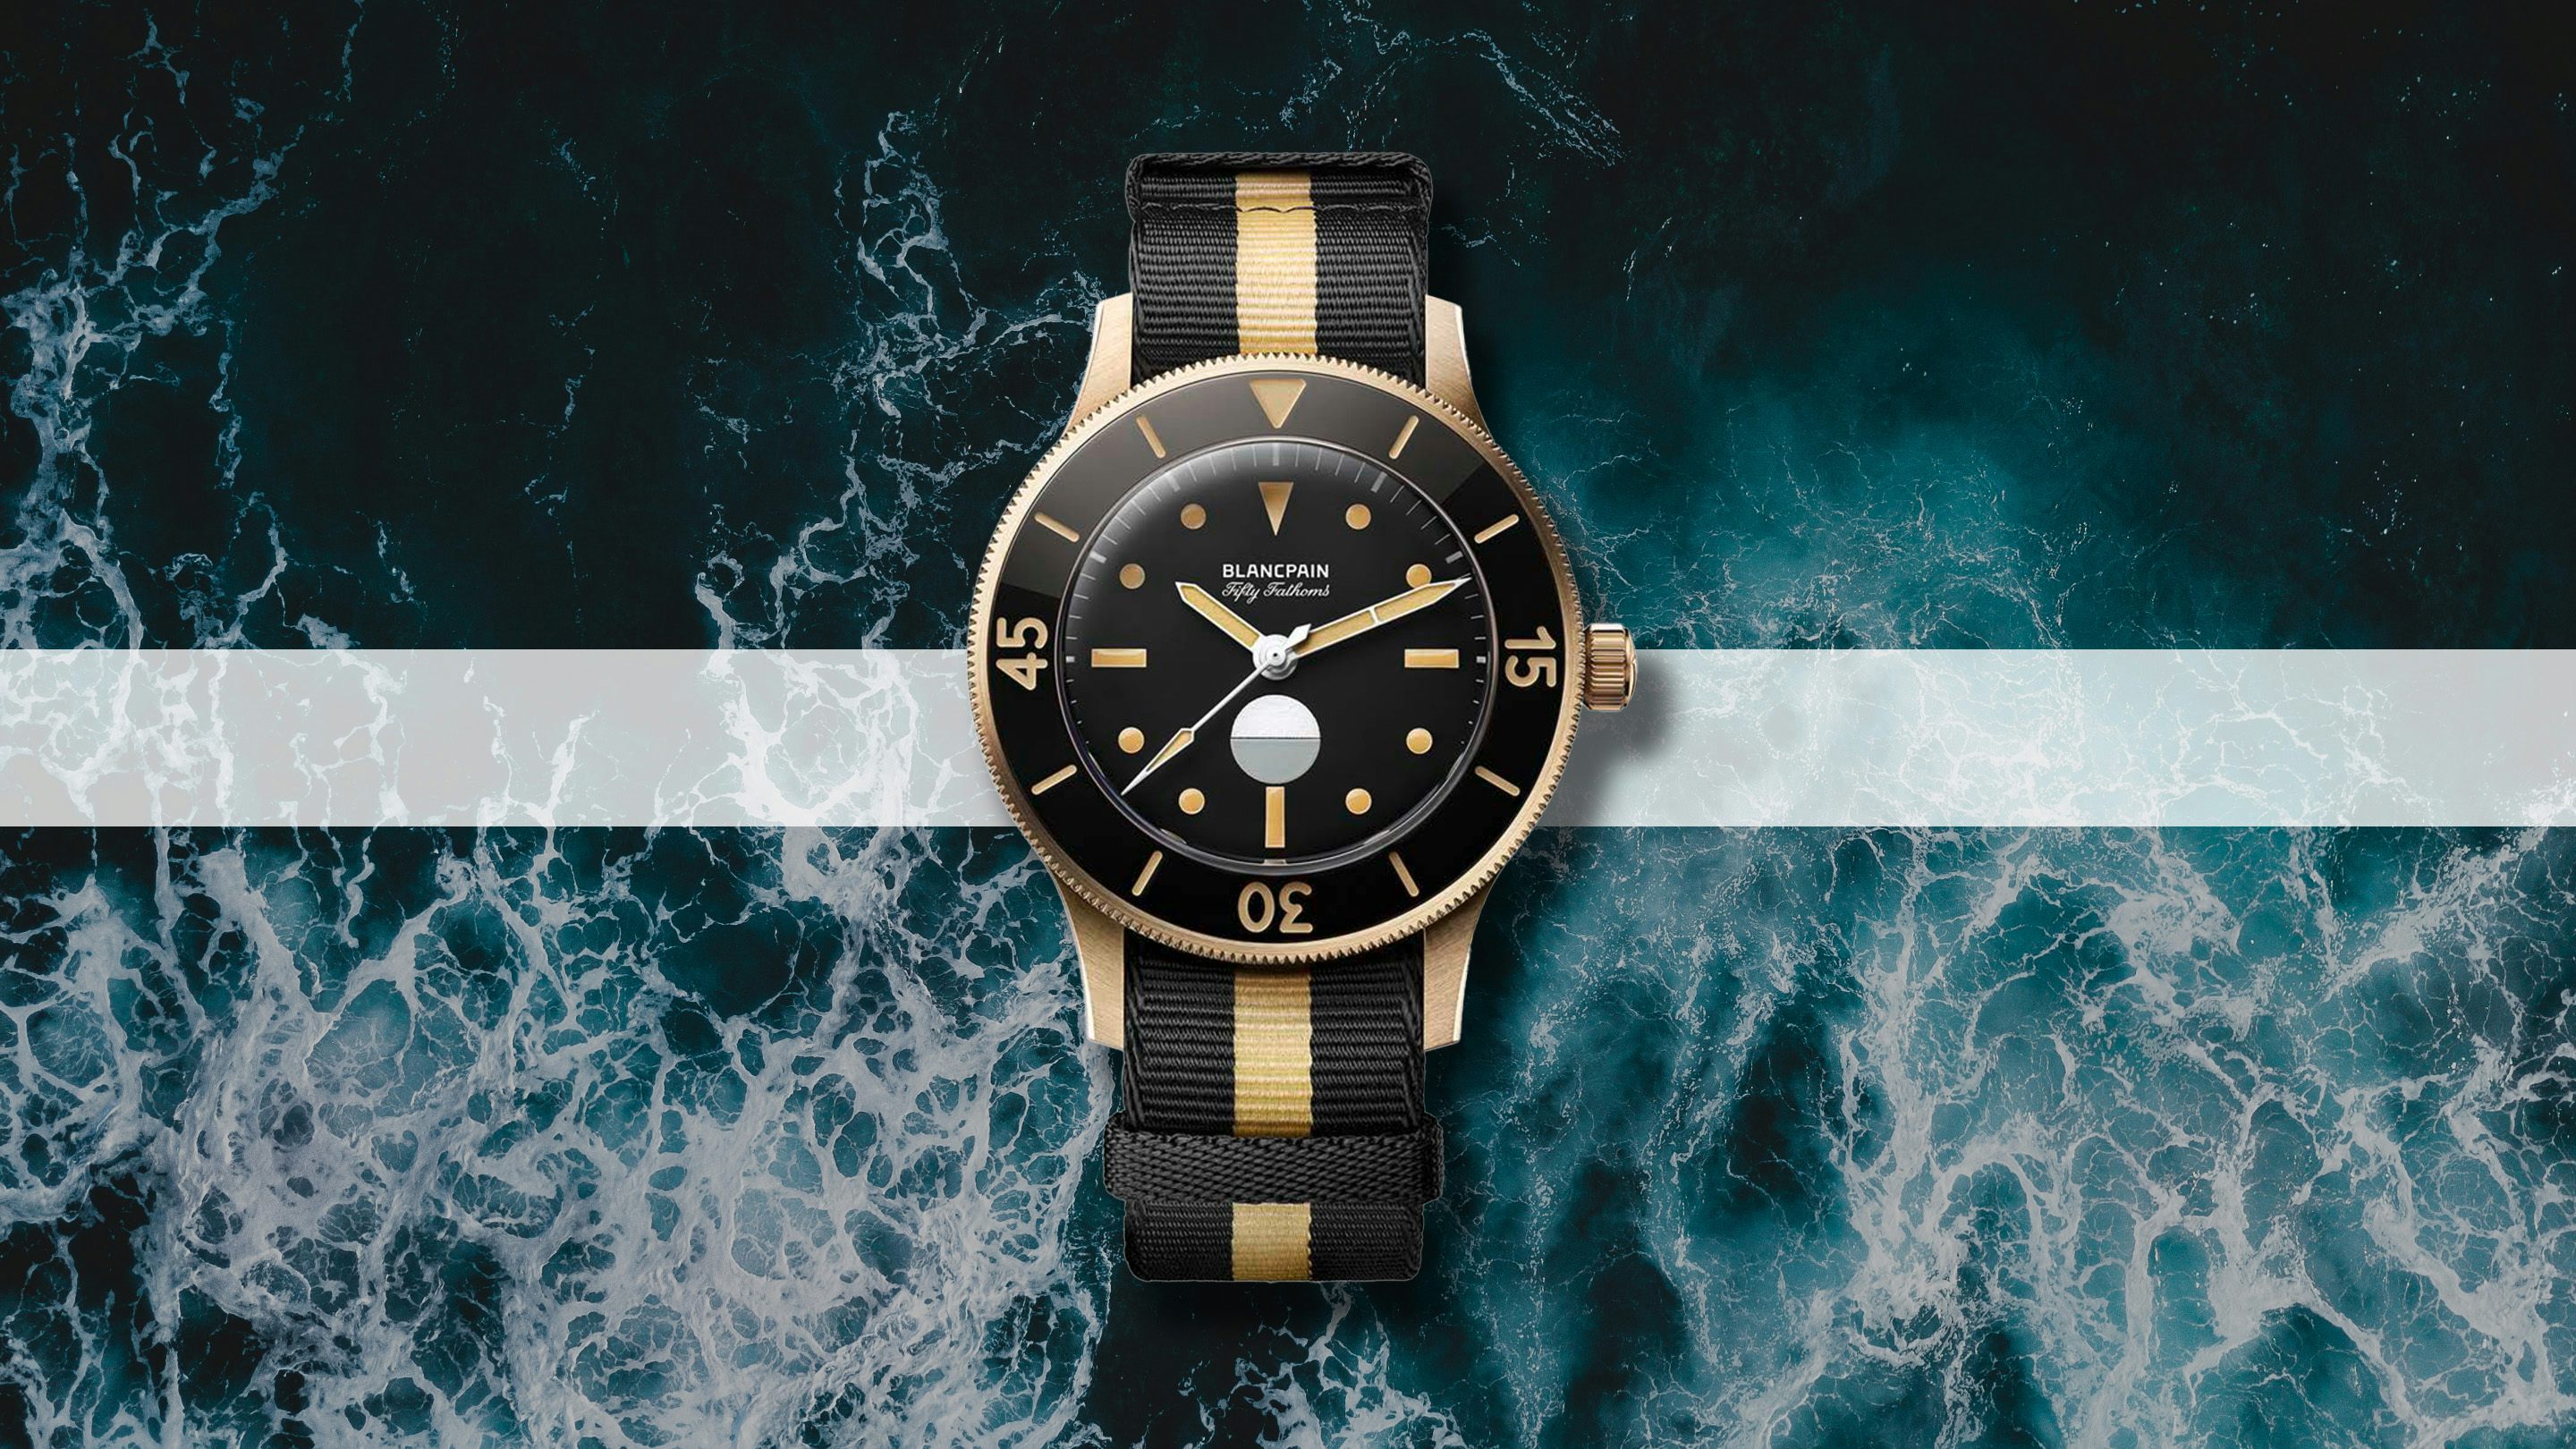 Introducing: The Blancpain Fifty Fathoms 70th Anniversary Act 3